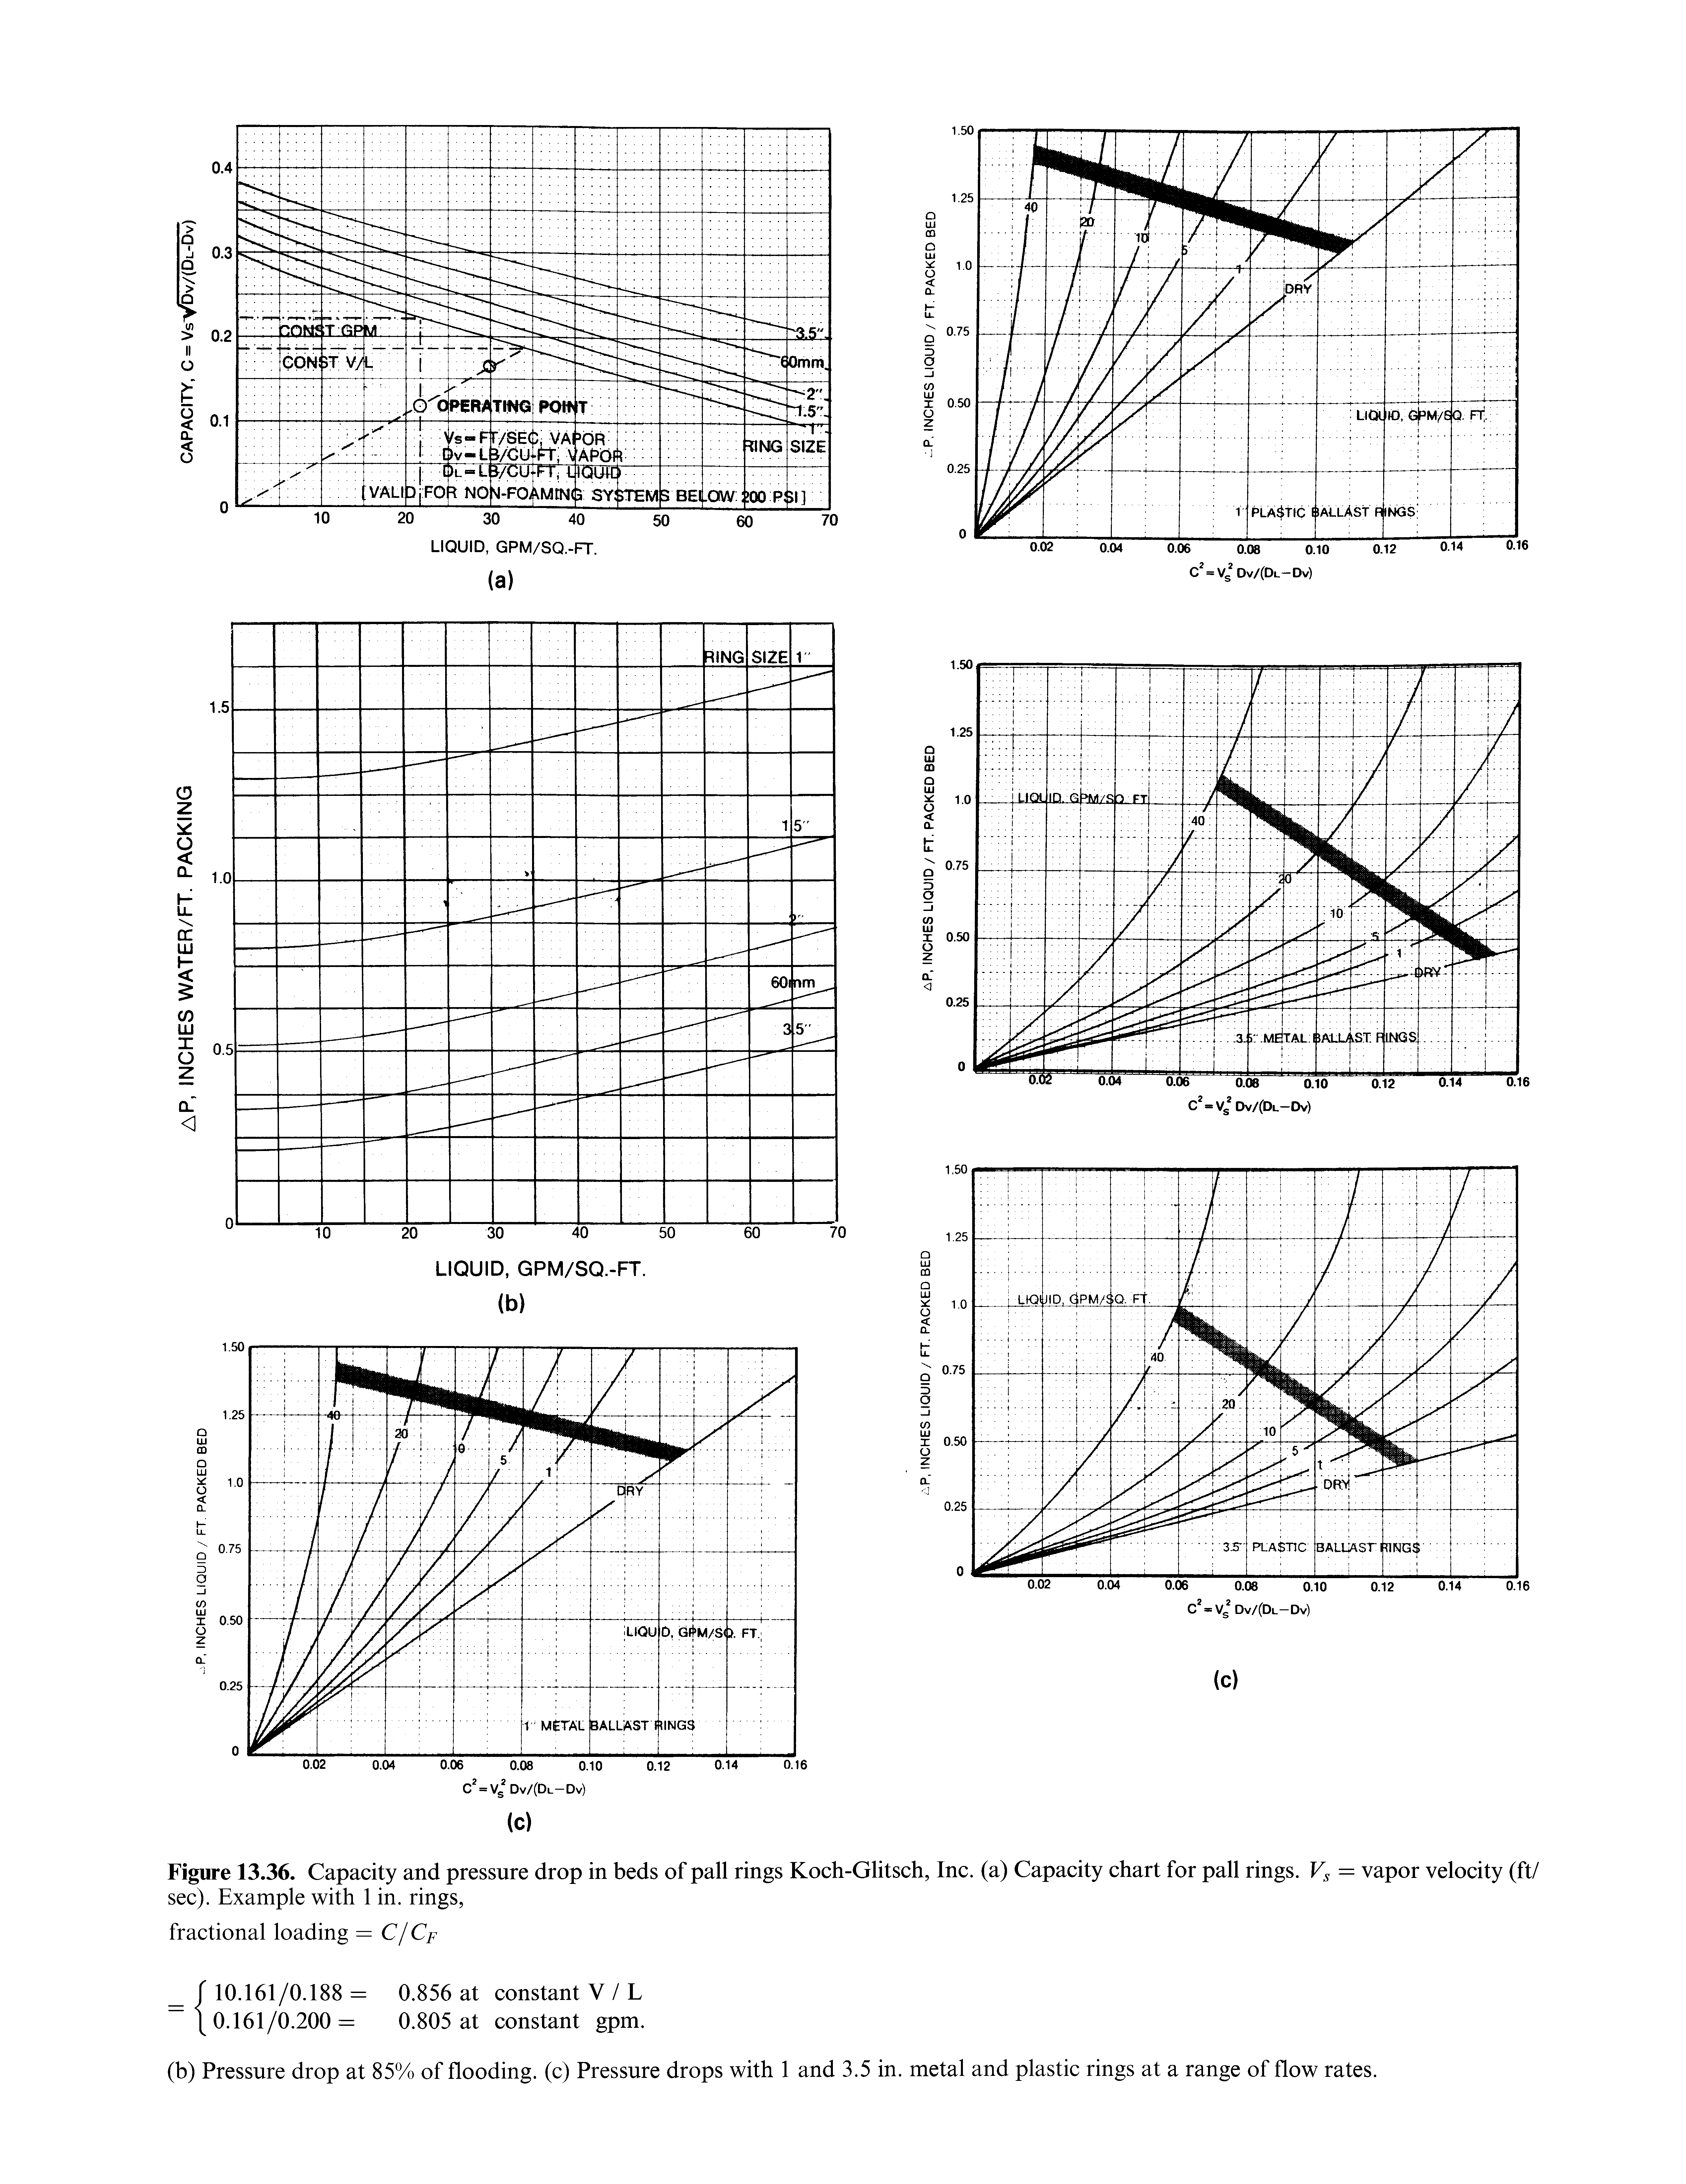 Figure 13.36. Capacity and pressure drop in beds of pall rings Koch-Glitsch, Inc. (a) Capacity chart for pall rings. F, = vapor velocity (ft/ sec). Example with 1 in. rings,...